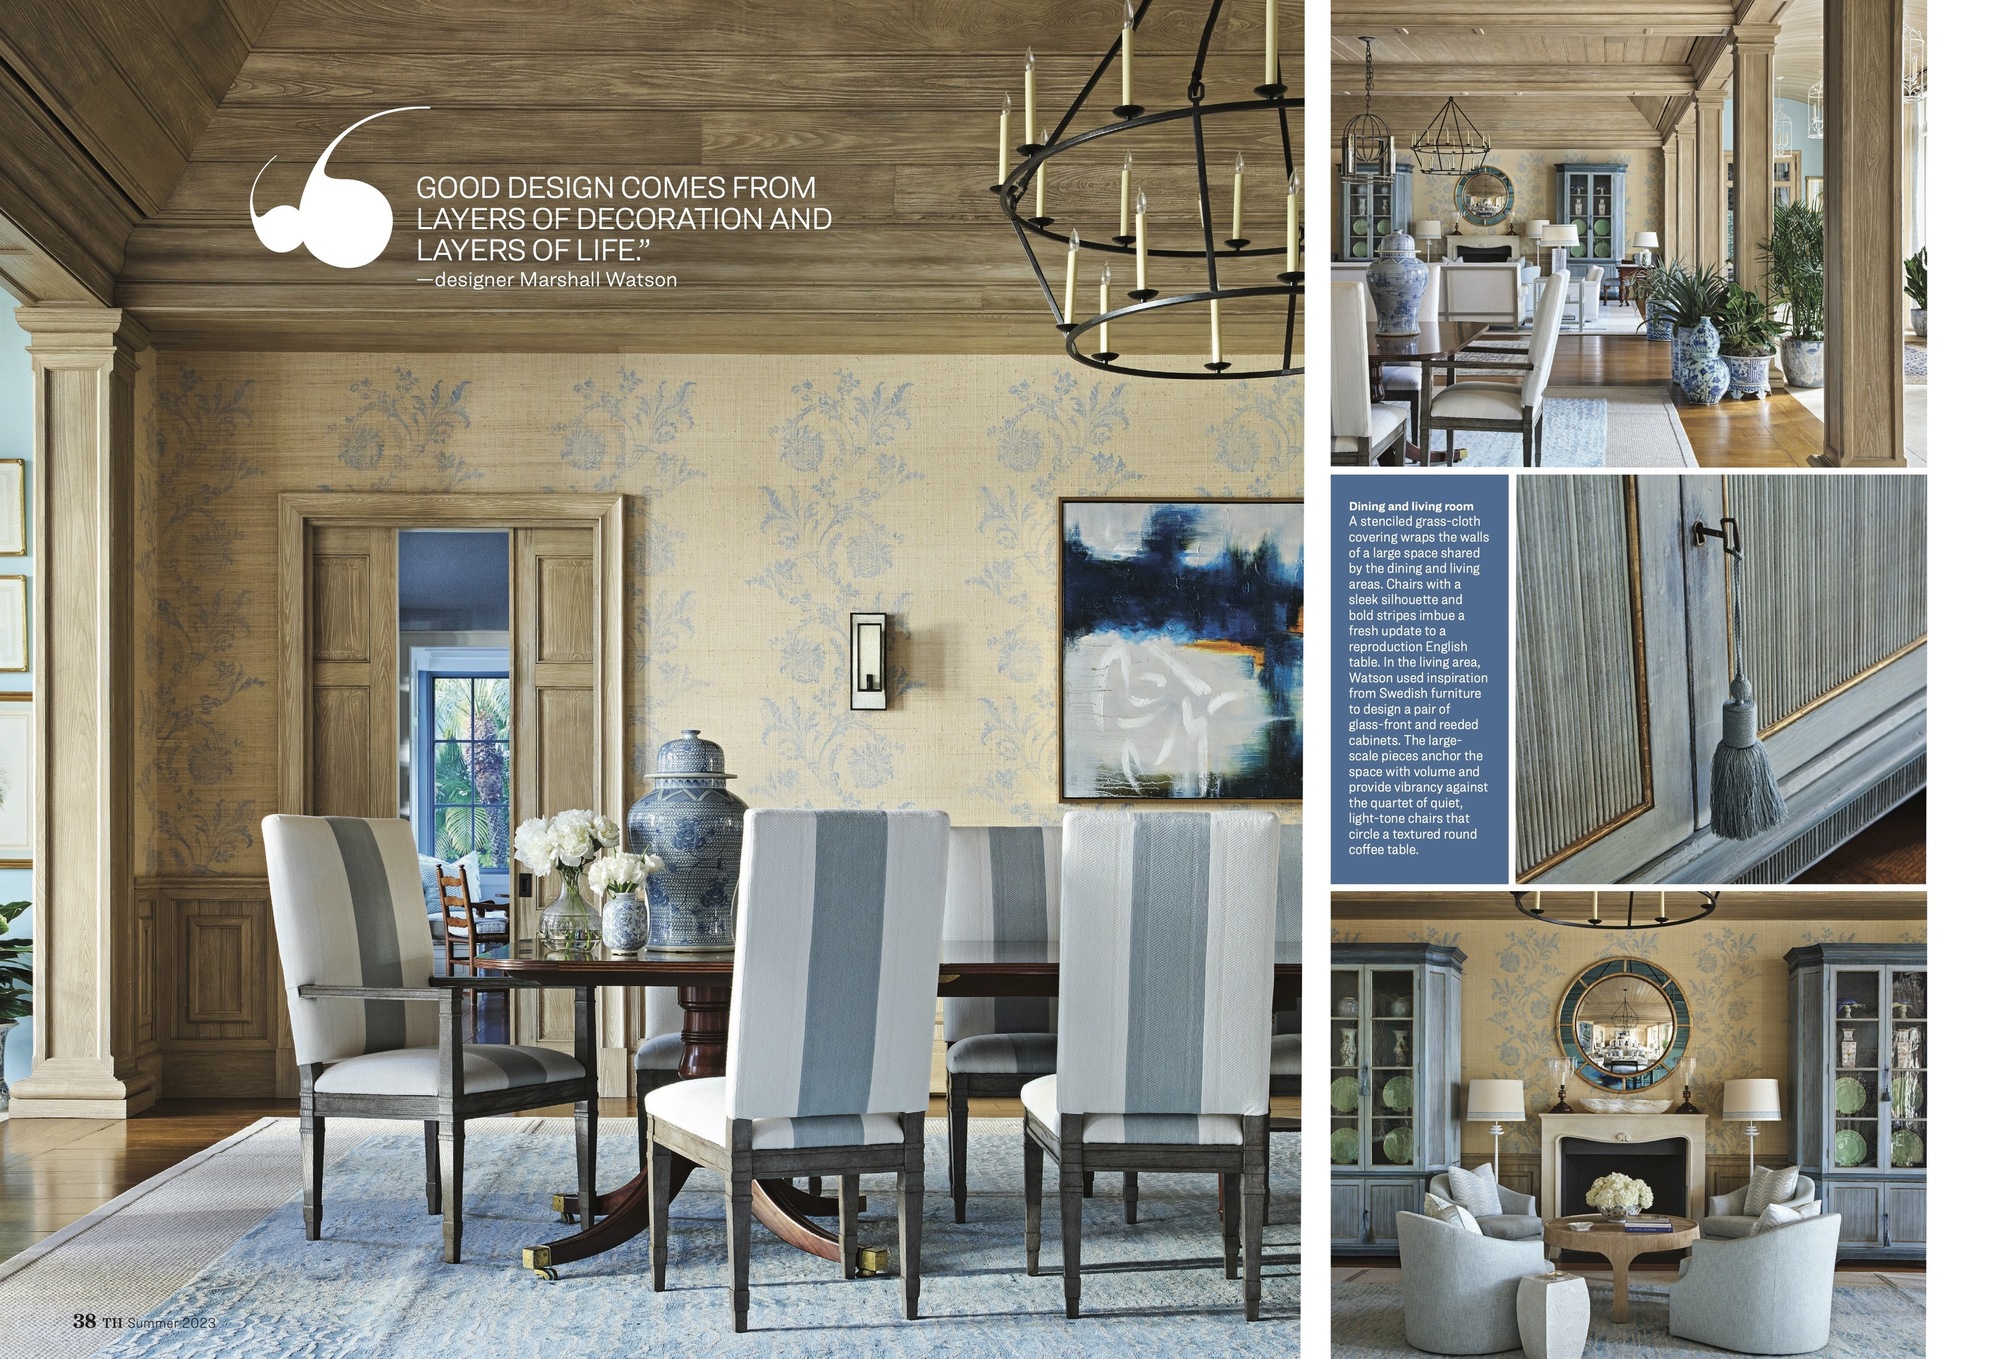 Traditional home interior magazine spread showing a dining area